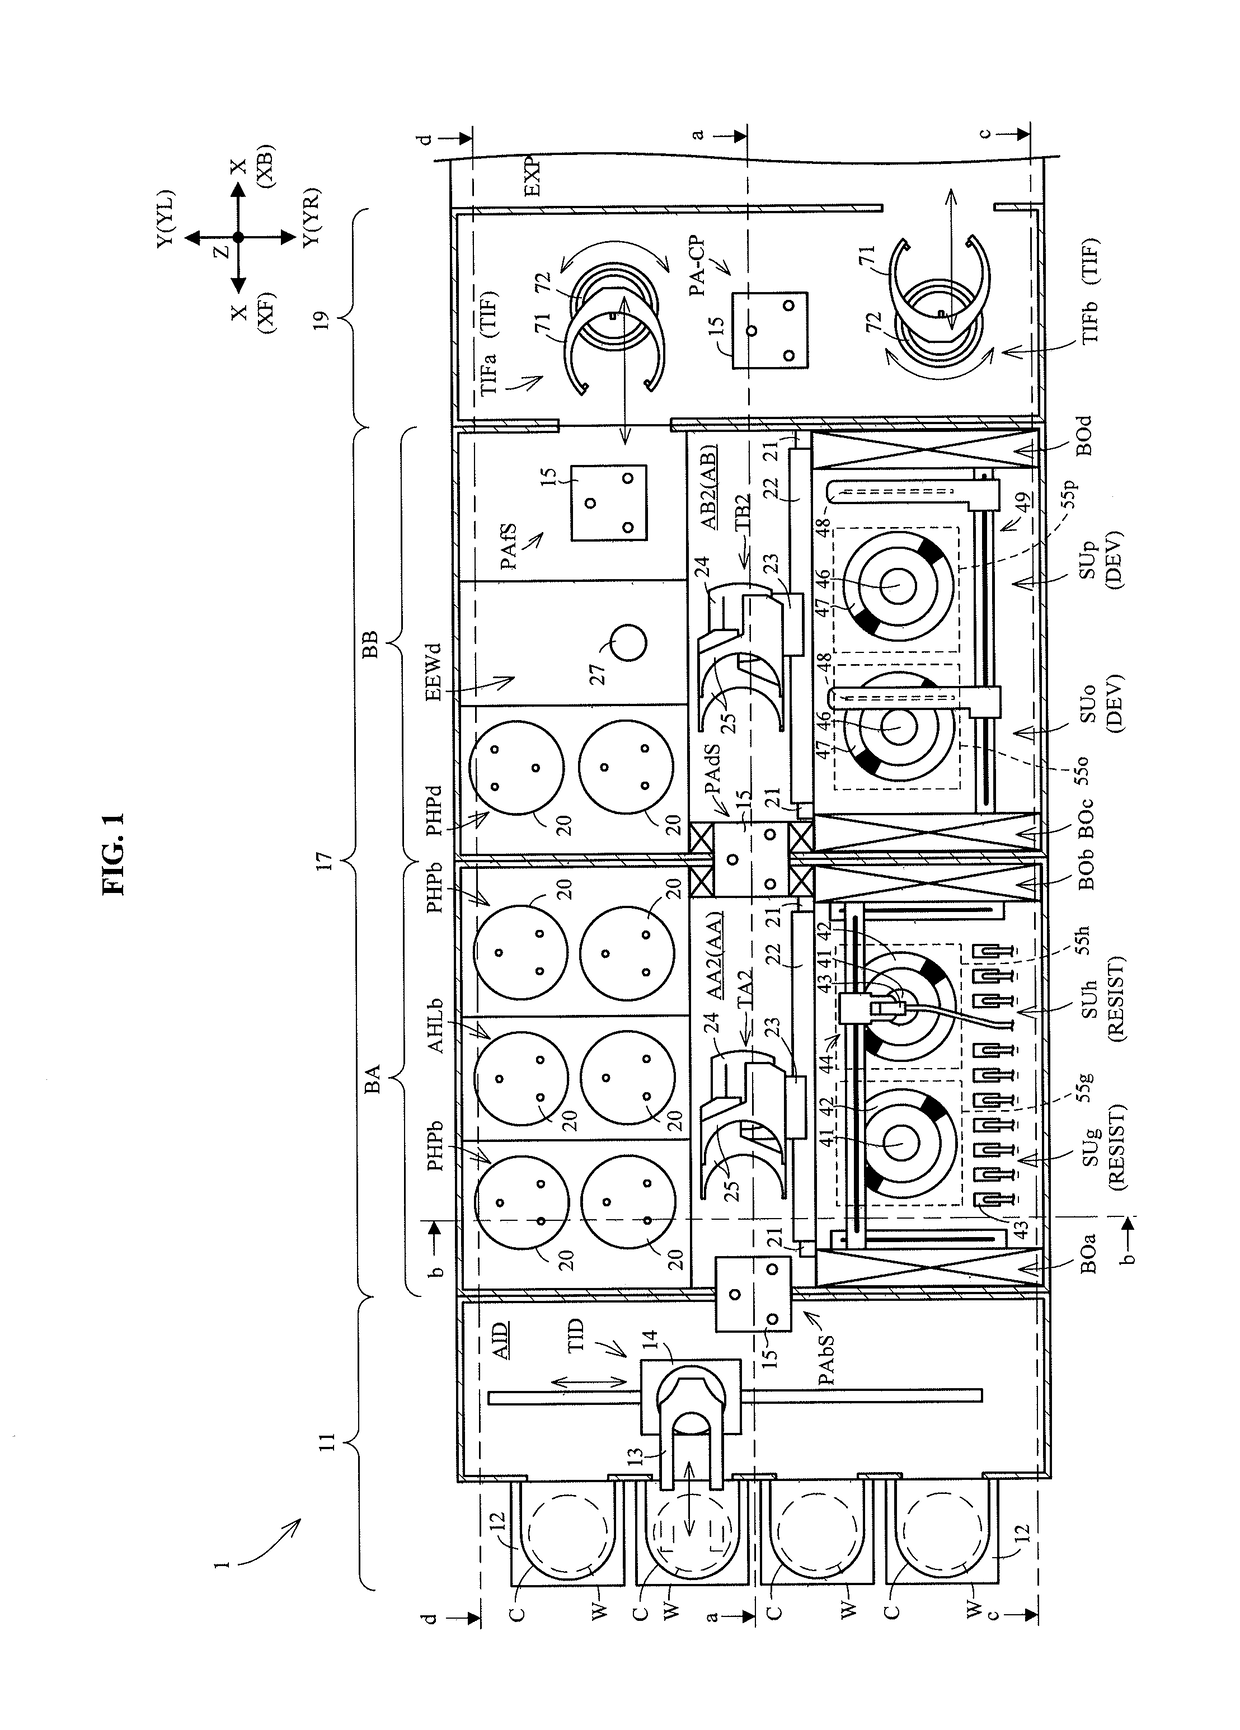 Substrate treating apparatus